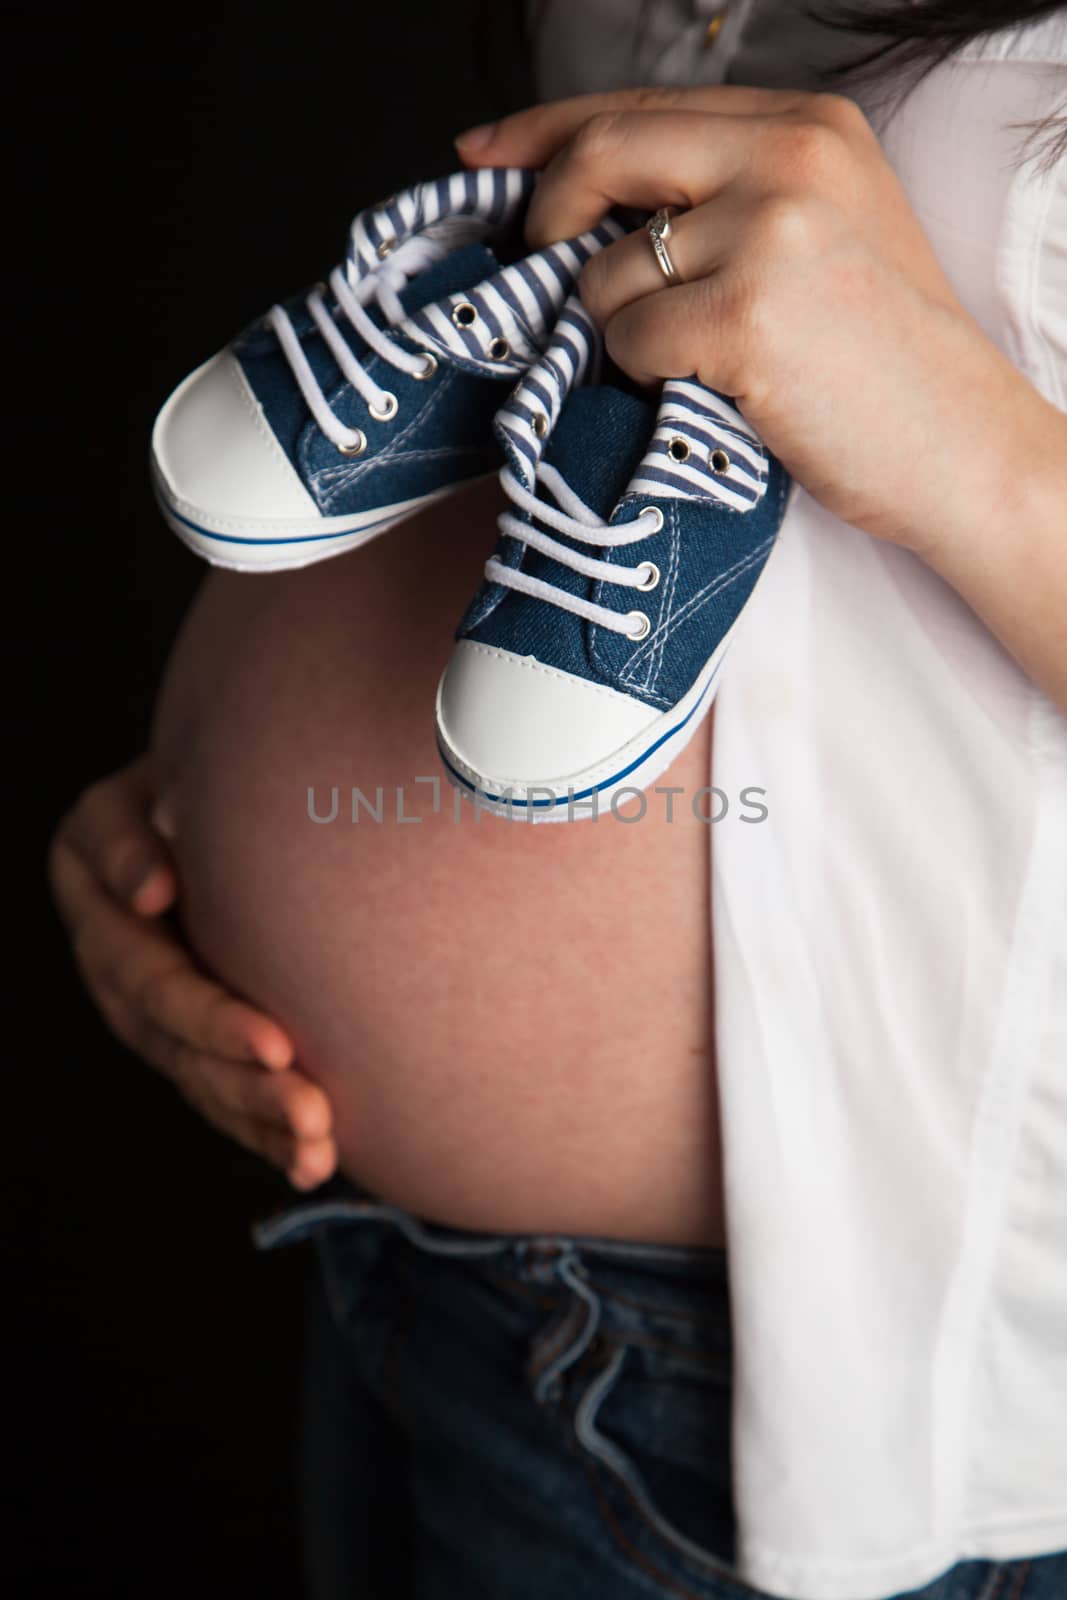 Pregnant woman holding a pair of baby shoes on her belly by Izaphoto